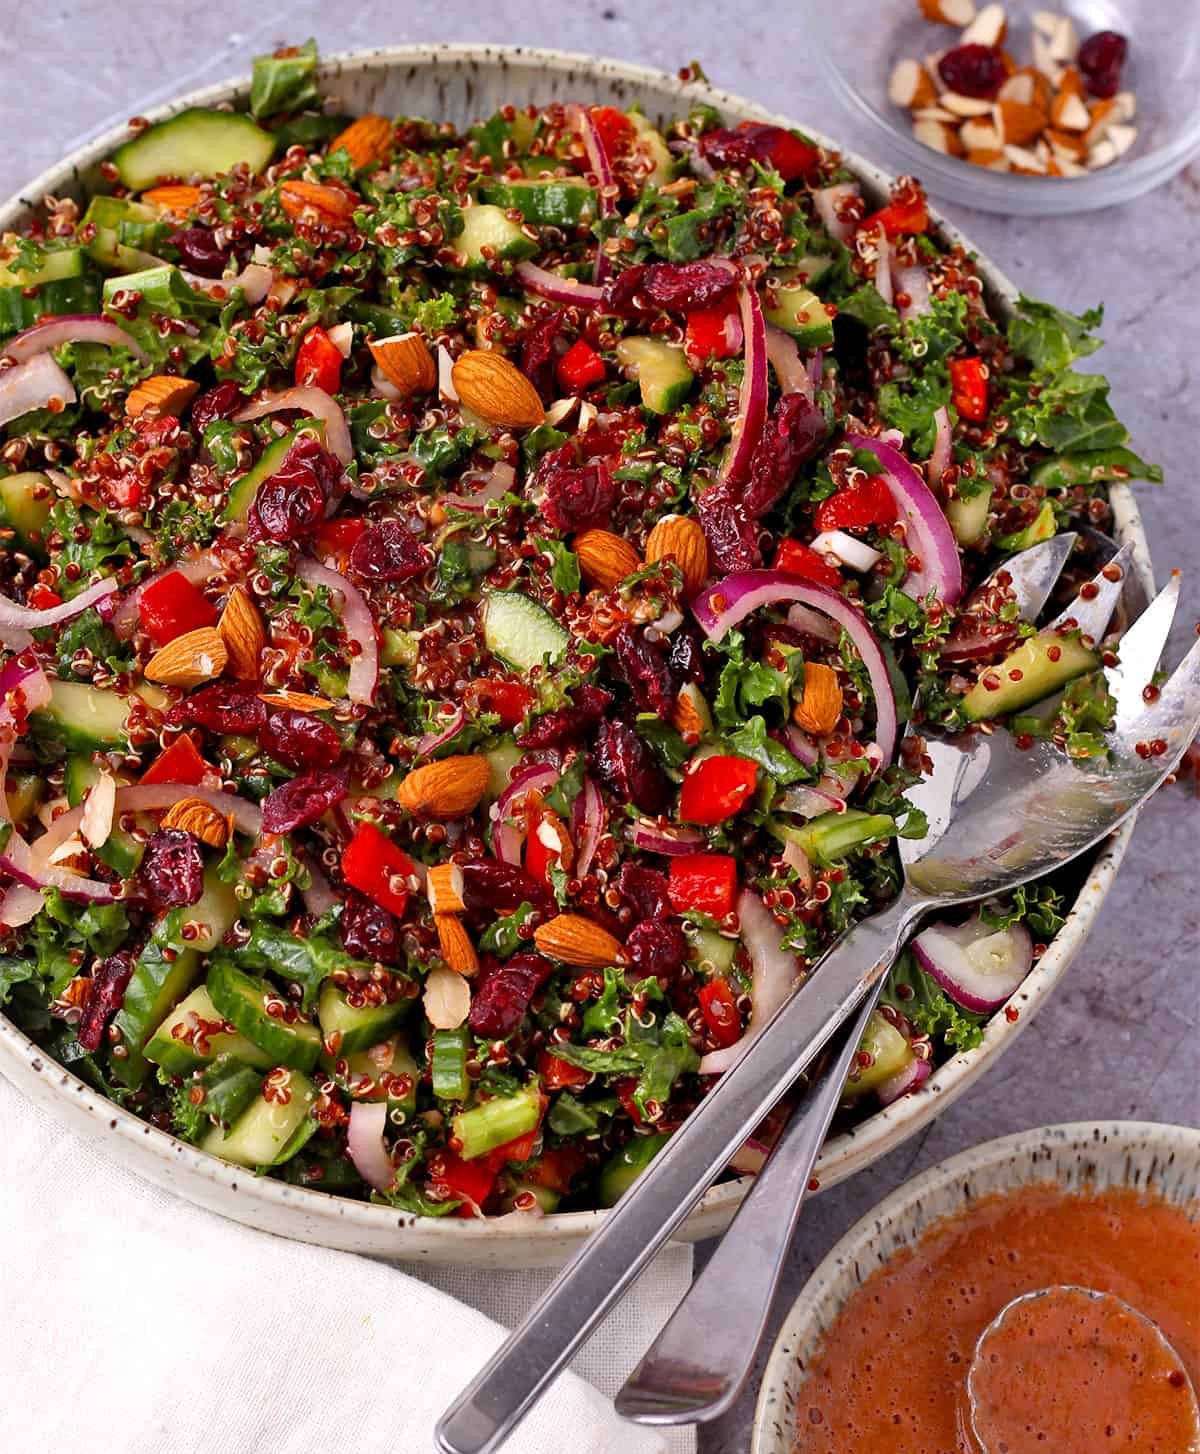 A bowl filled with a salad of quinoa, kale, cranberries, almonds, red peppers, and red onion with a bowl of tomato dressing.